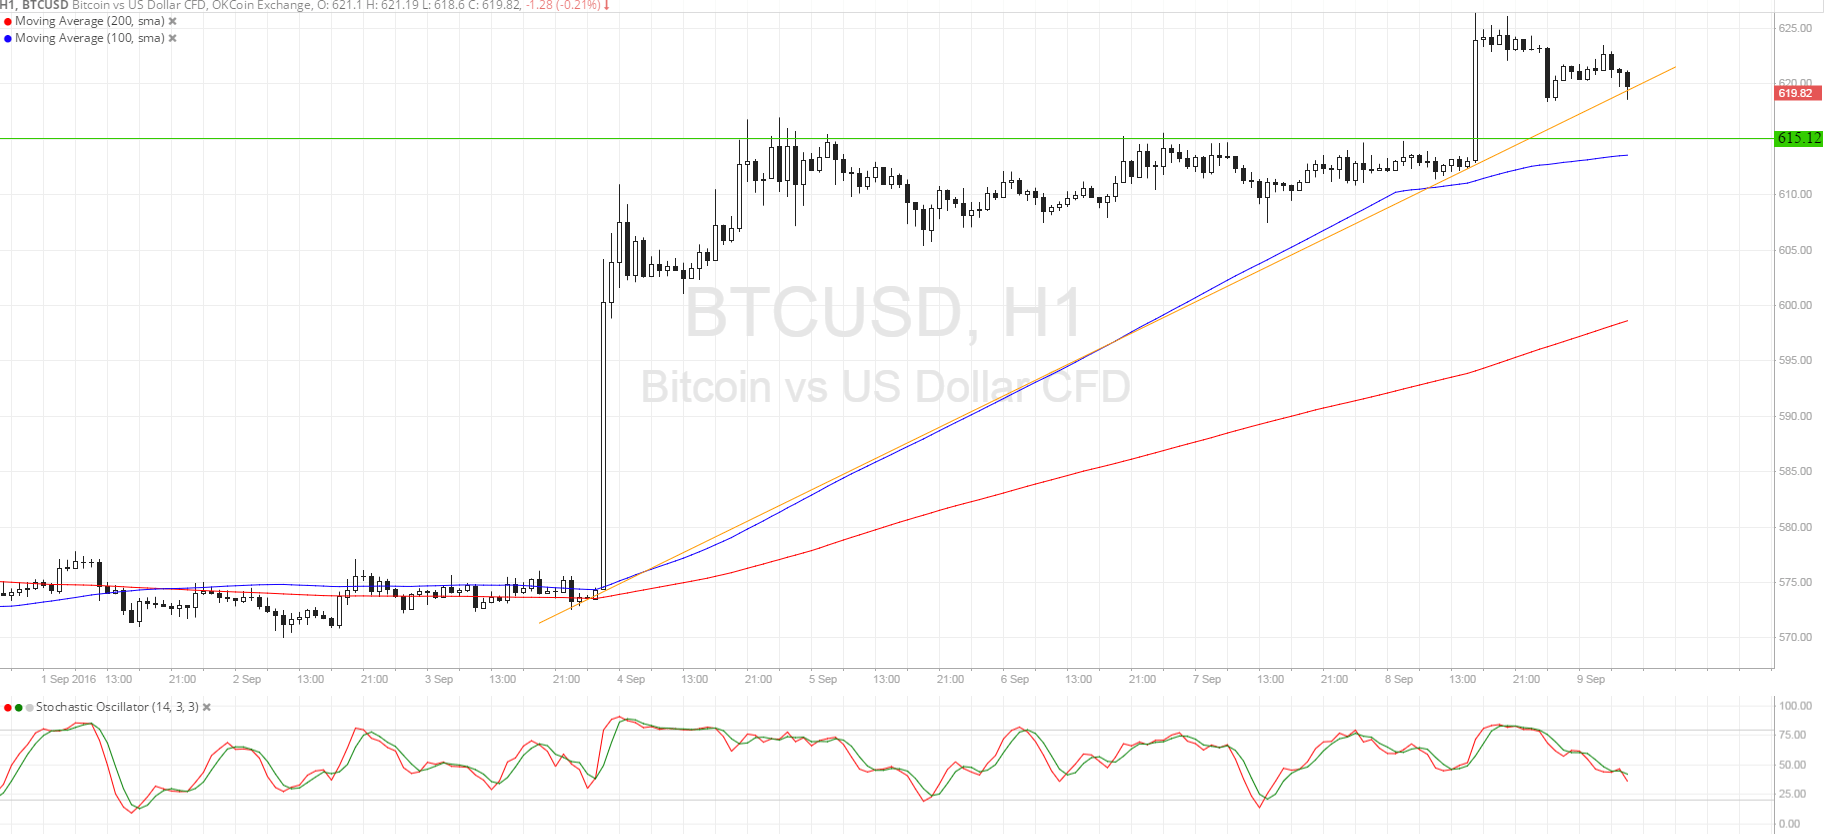 Bitcoin Price Technical Analysis for 09/09/2016 - Break and Retest?